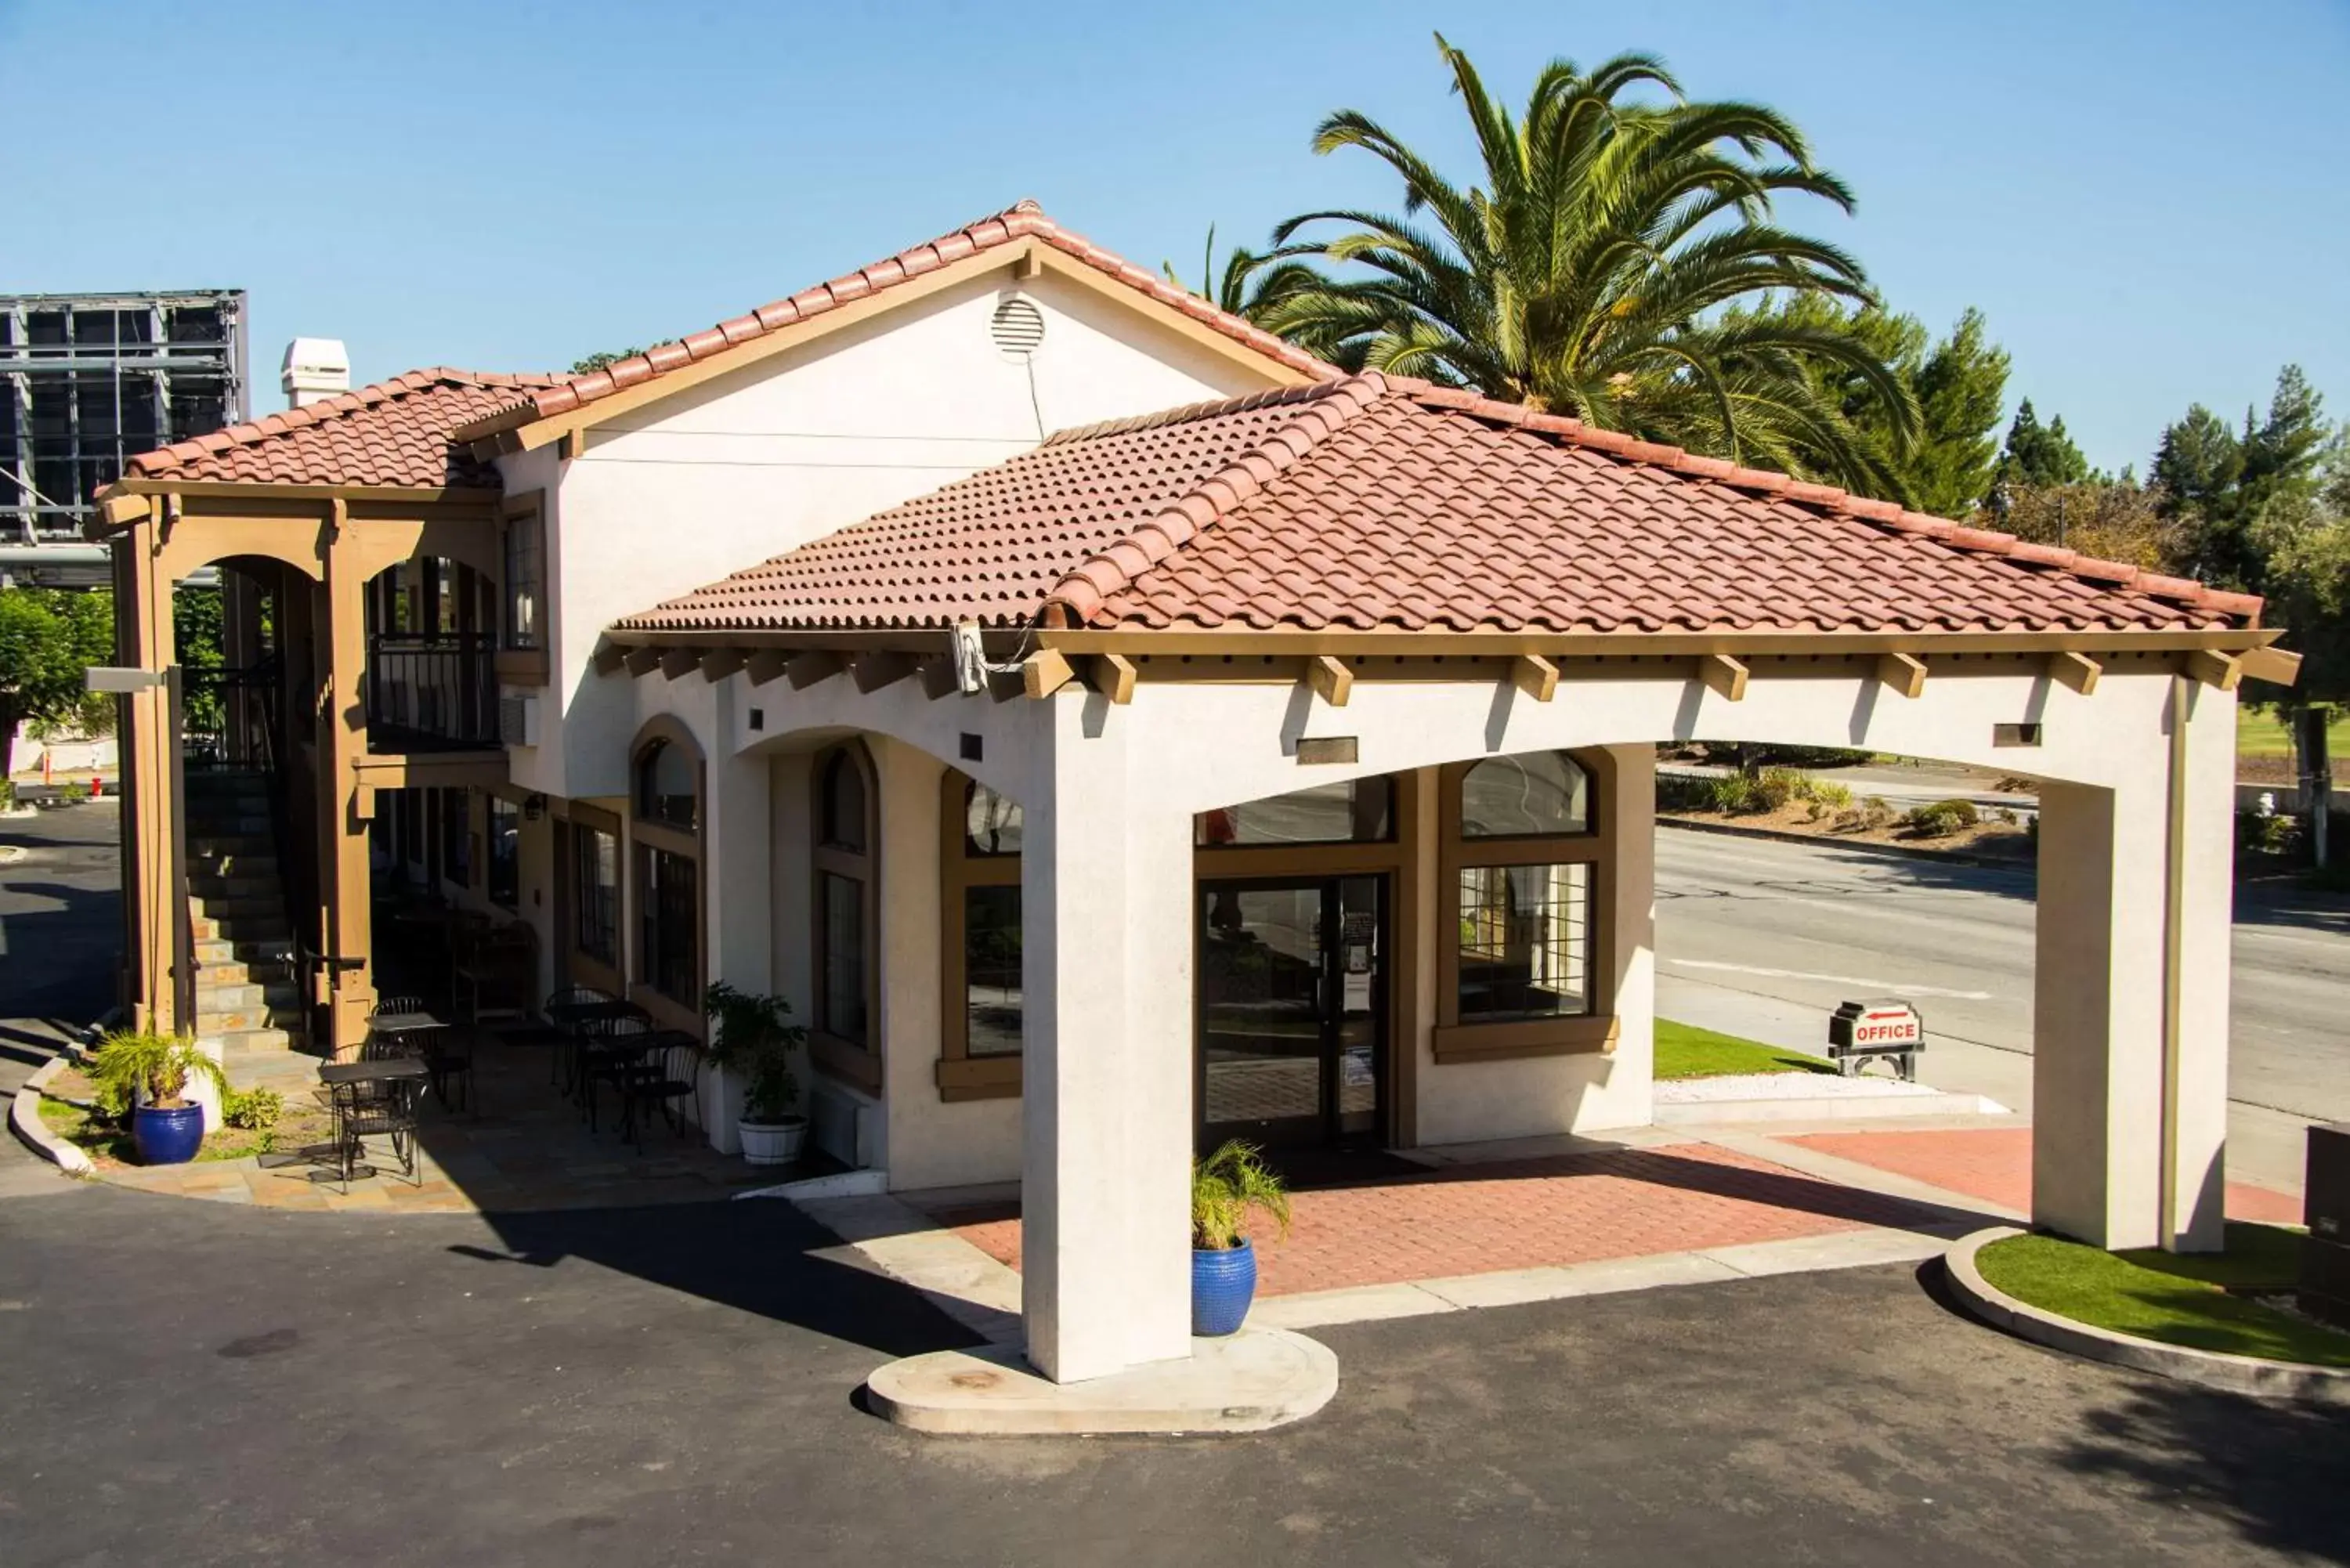 Property Building in SureStay Plus by Best Western Santa Clara Silicon Valley